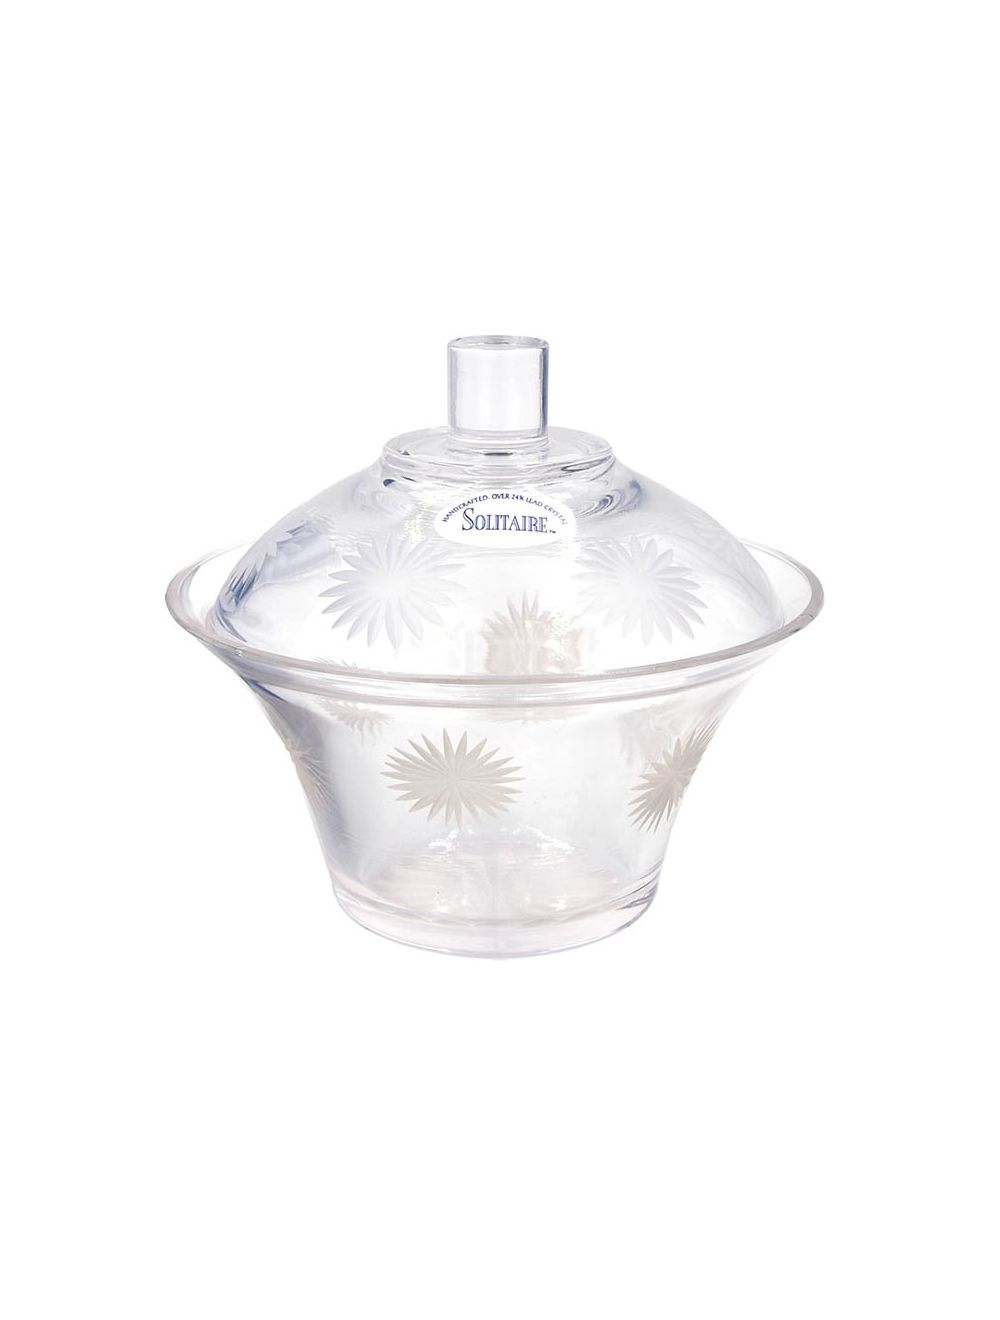 Solitaire Sugar Bowl With Cover Galaxy 300 ml